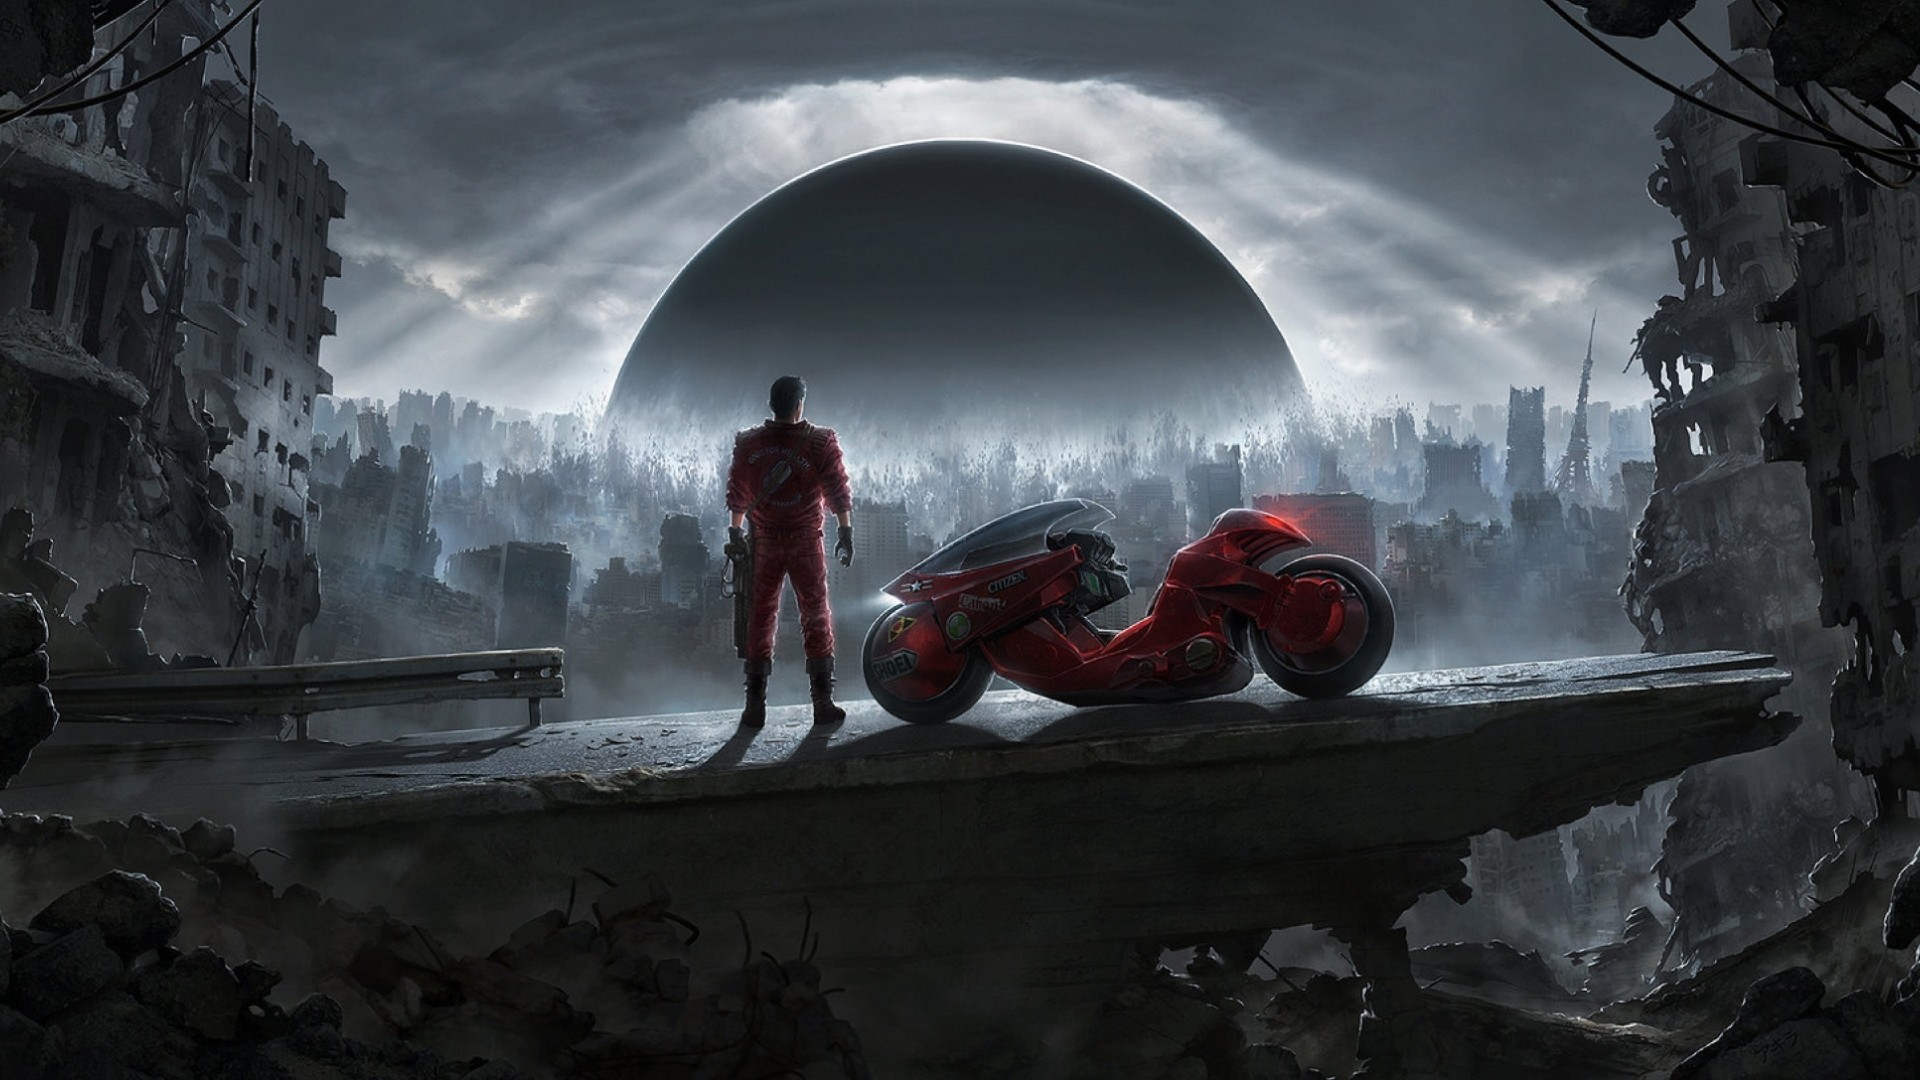 akira wallpaper hd,action adventure game,pc game,darkness,games,digital compositing